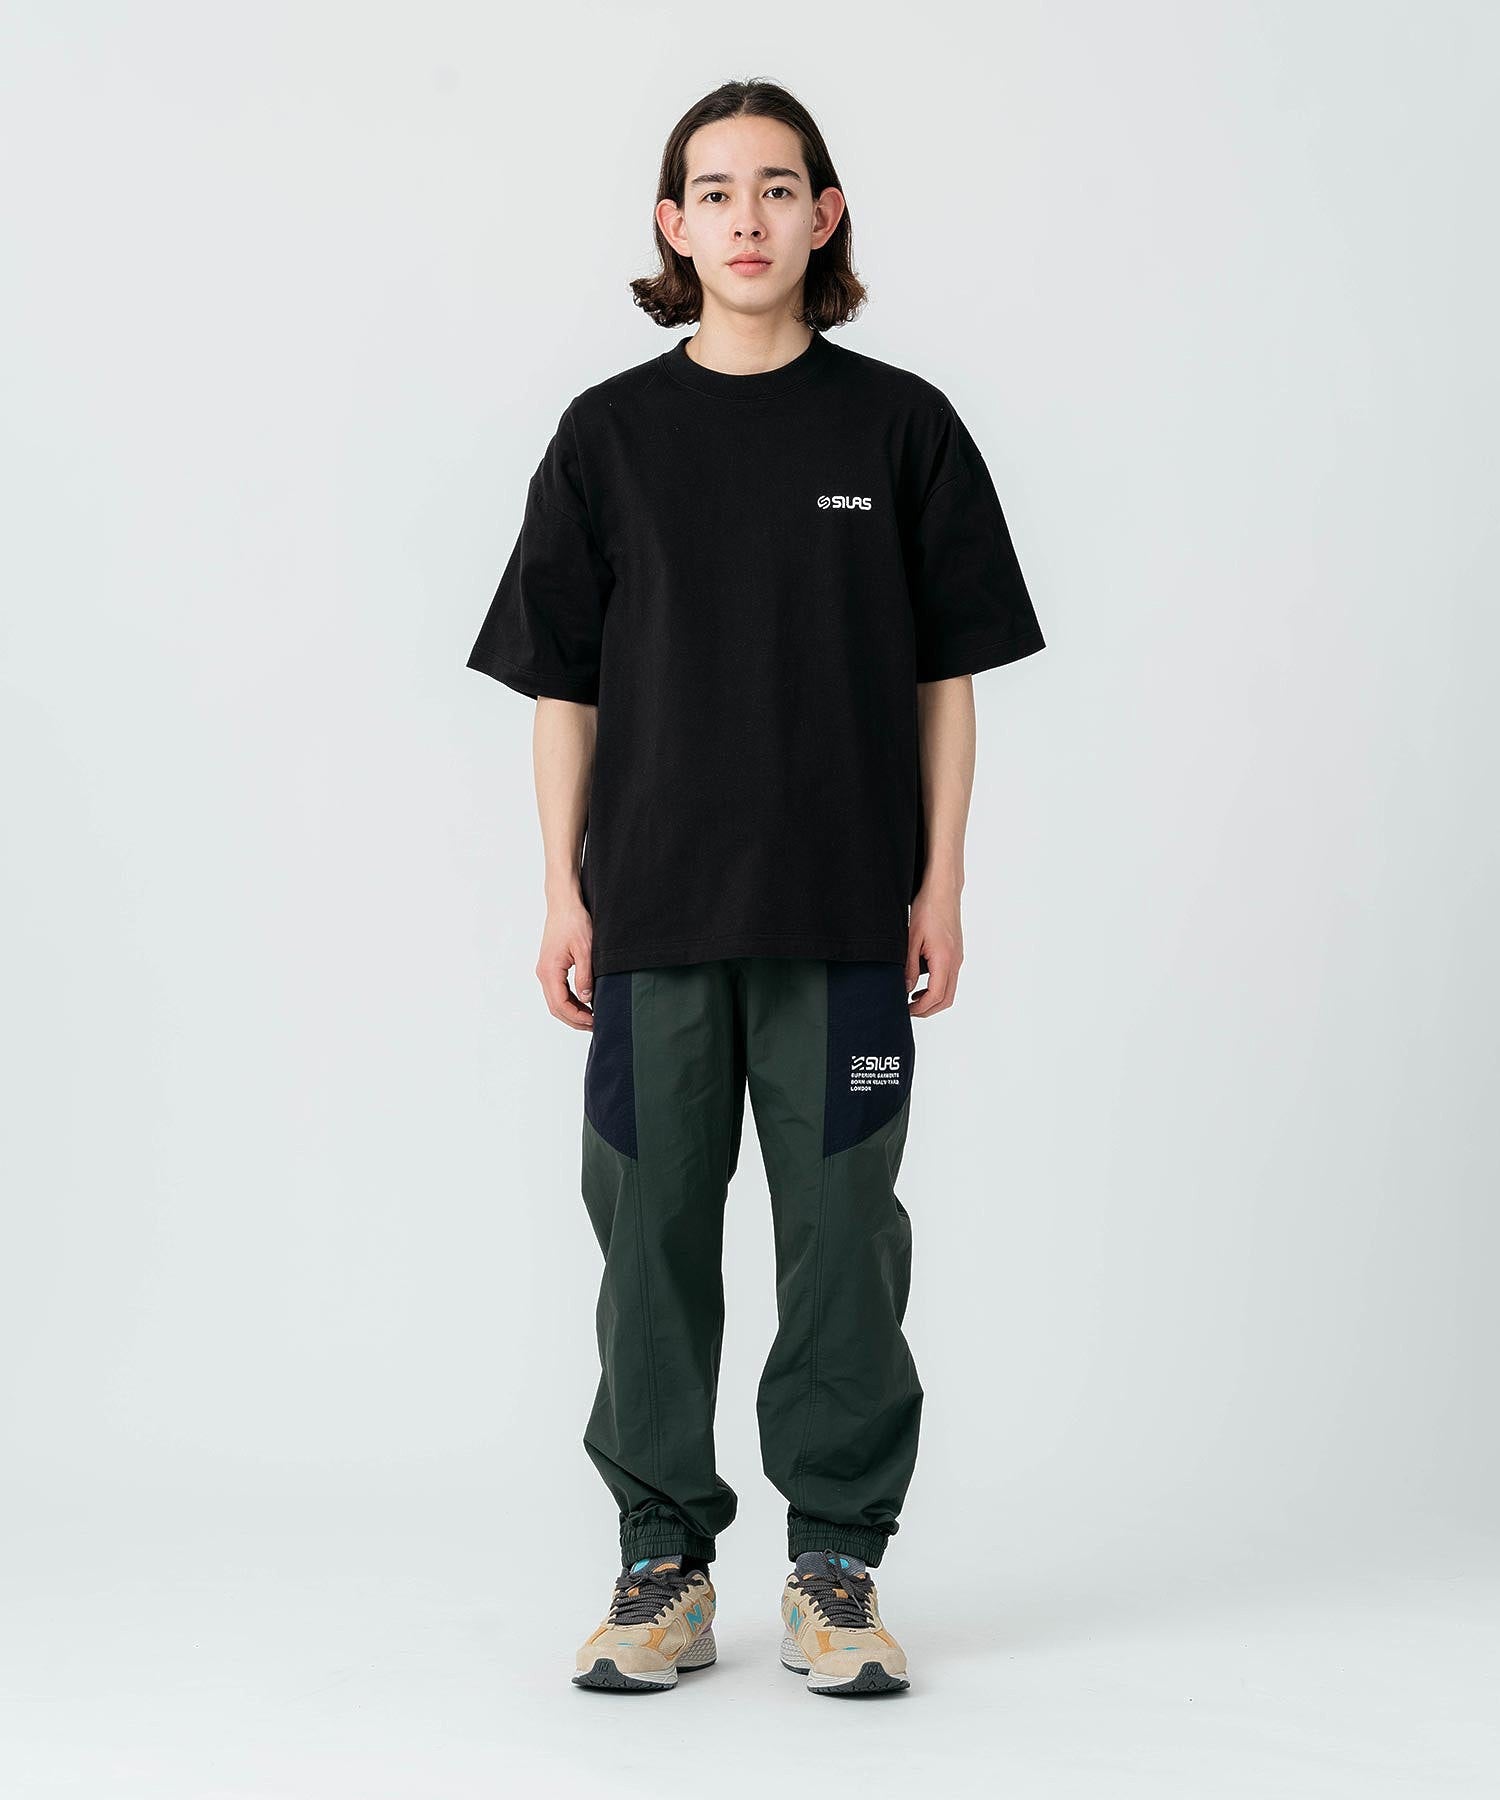 OLD LOGO WIDE S/S TEE SILAS